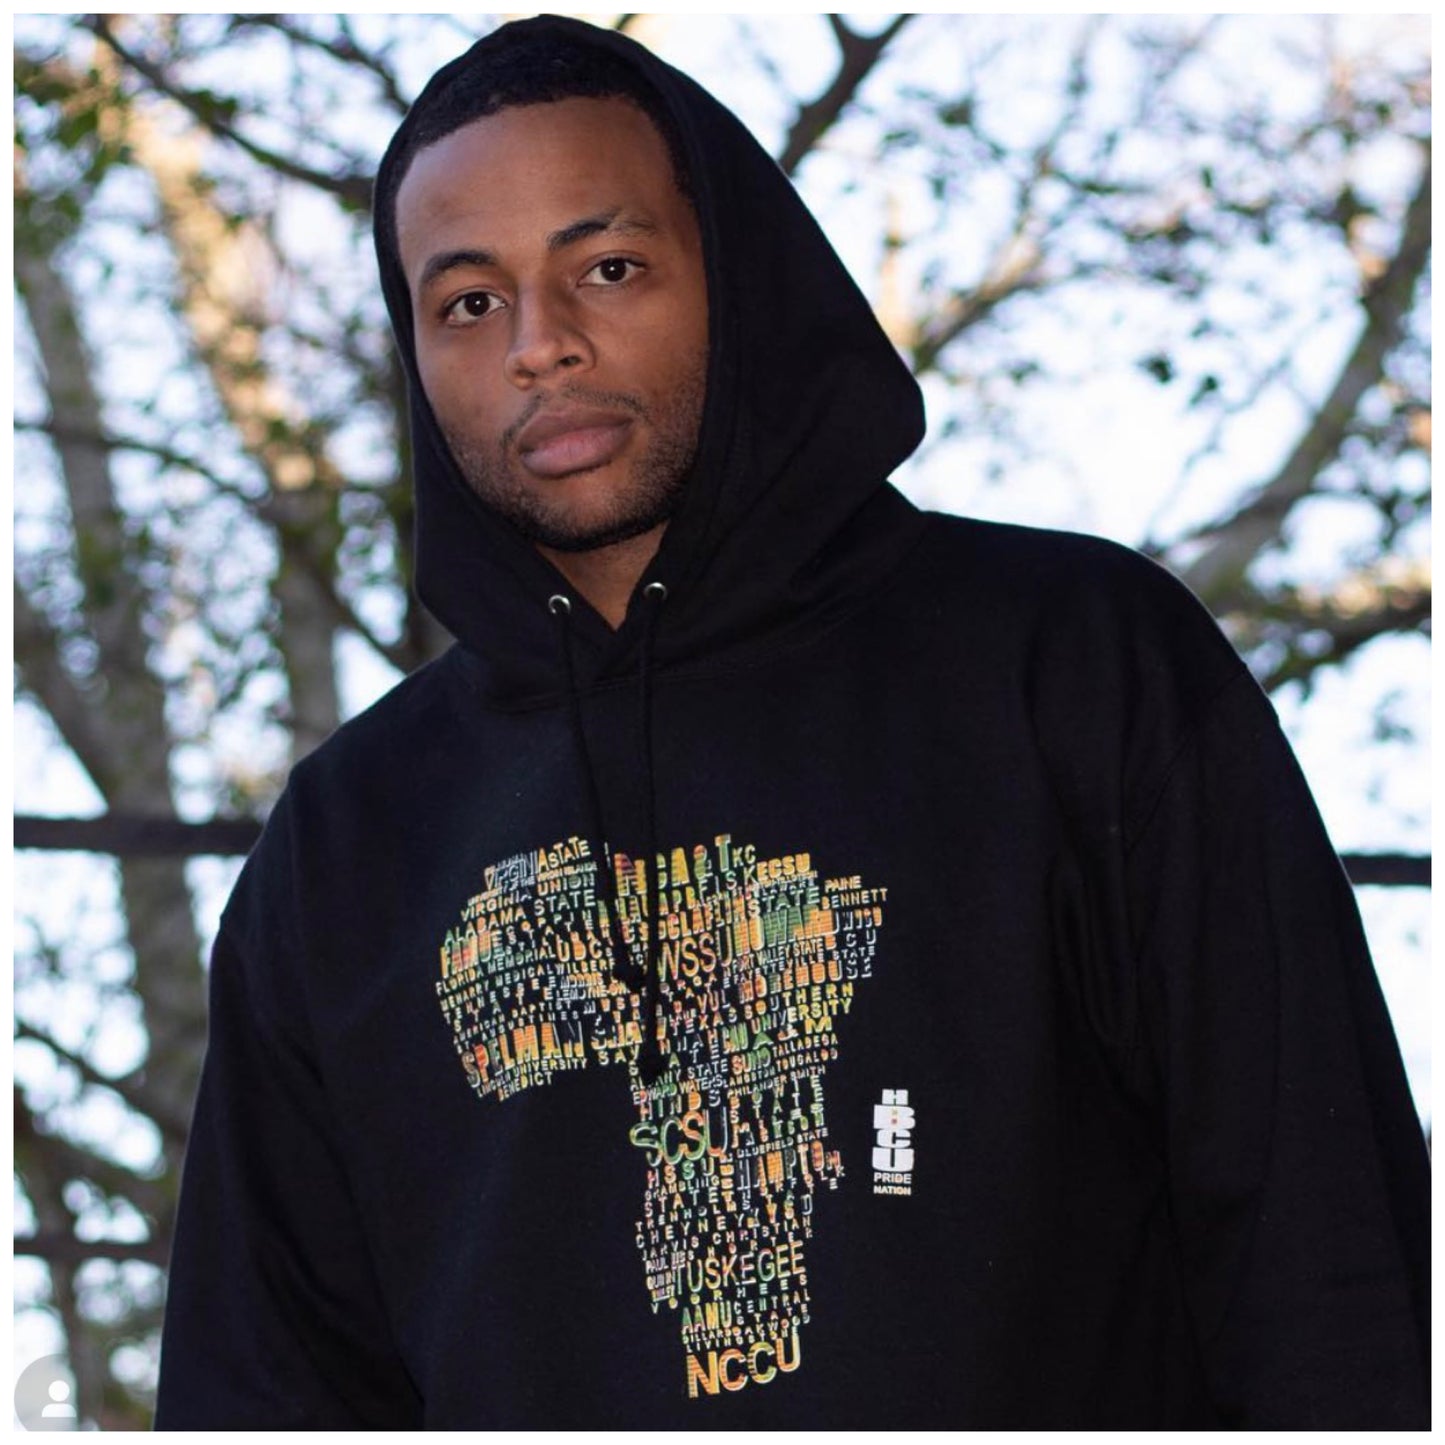 The "Respect Your Roots" Hoodie in Black and Kente  #Africa